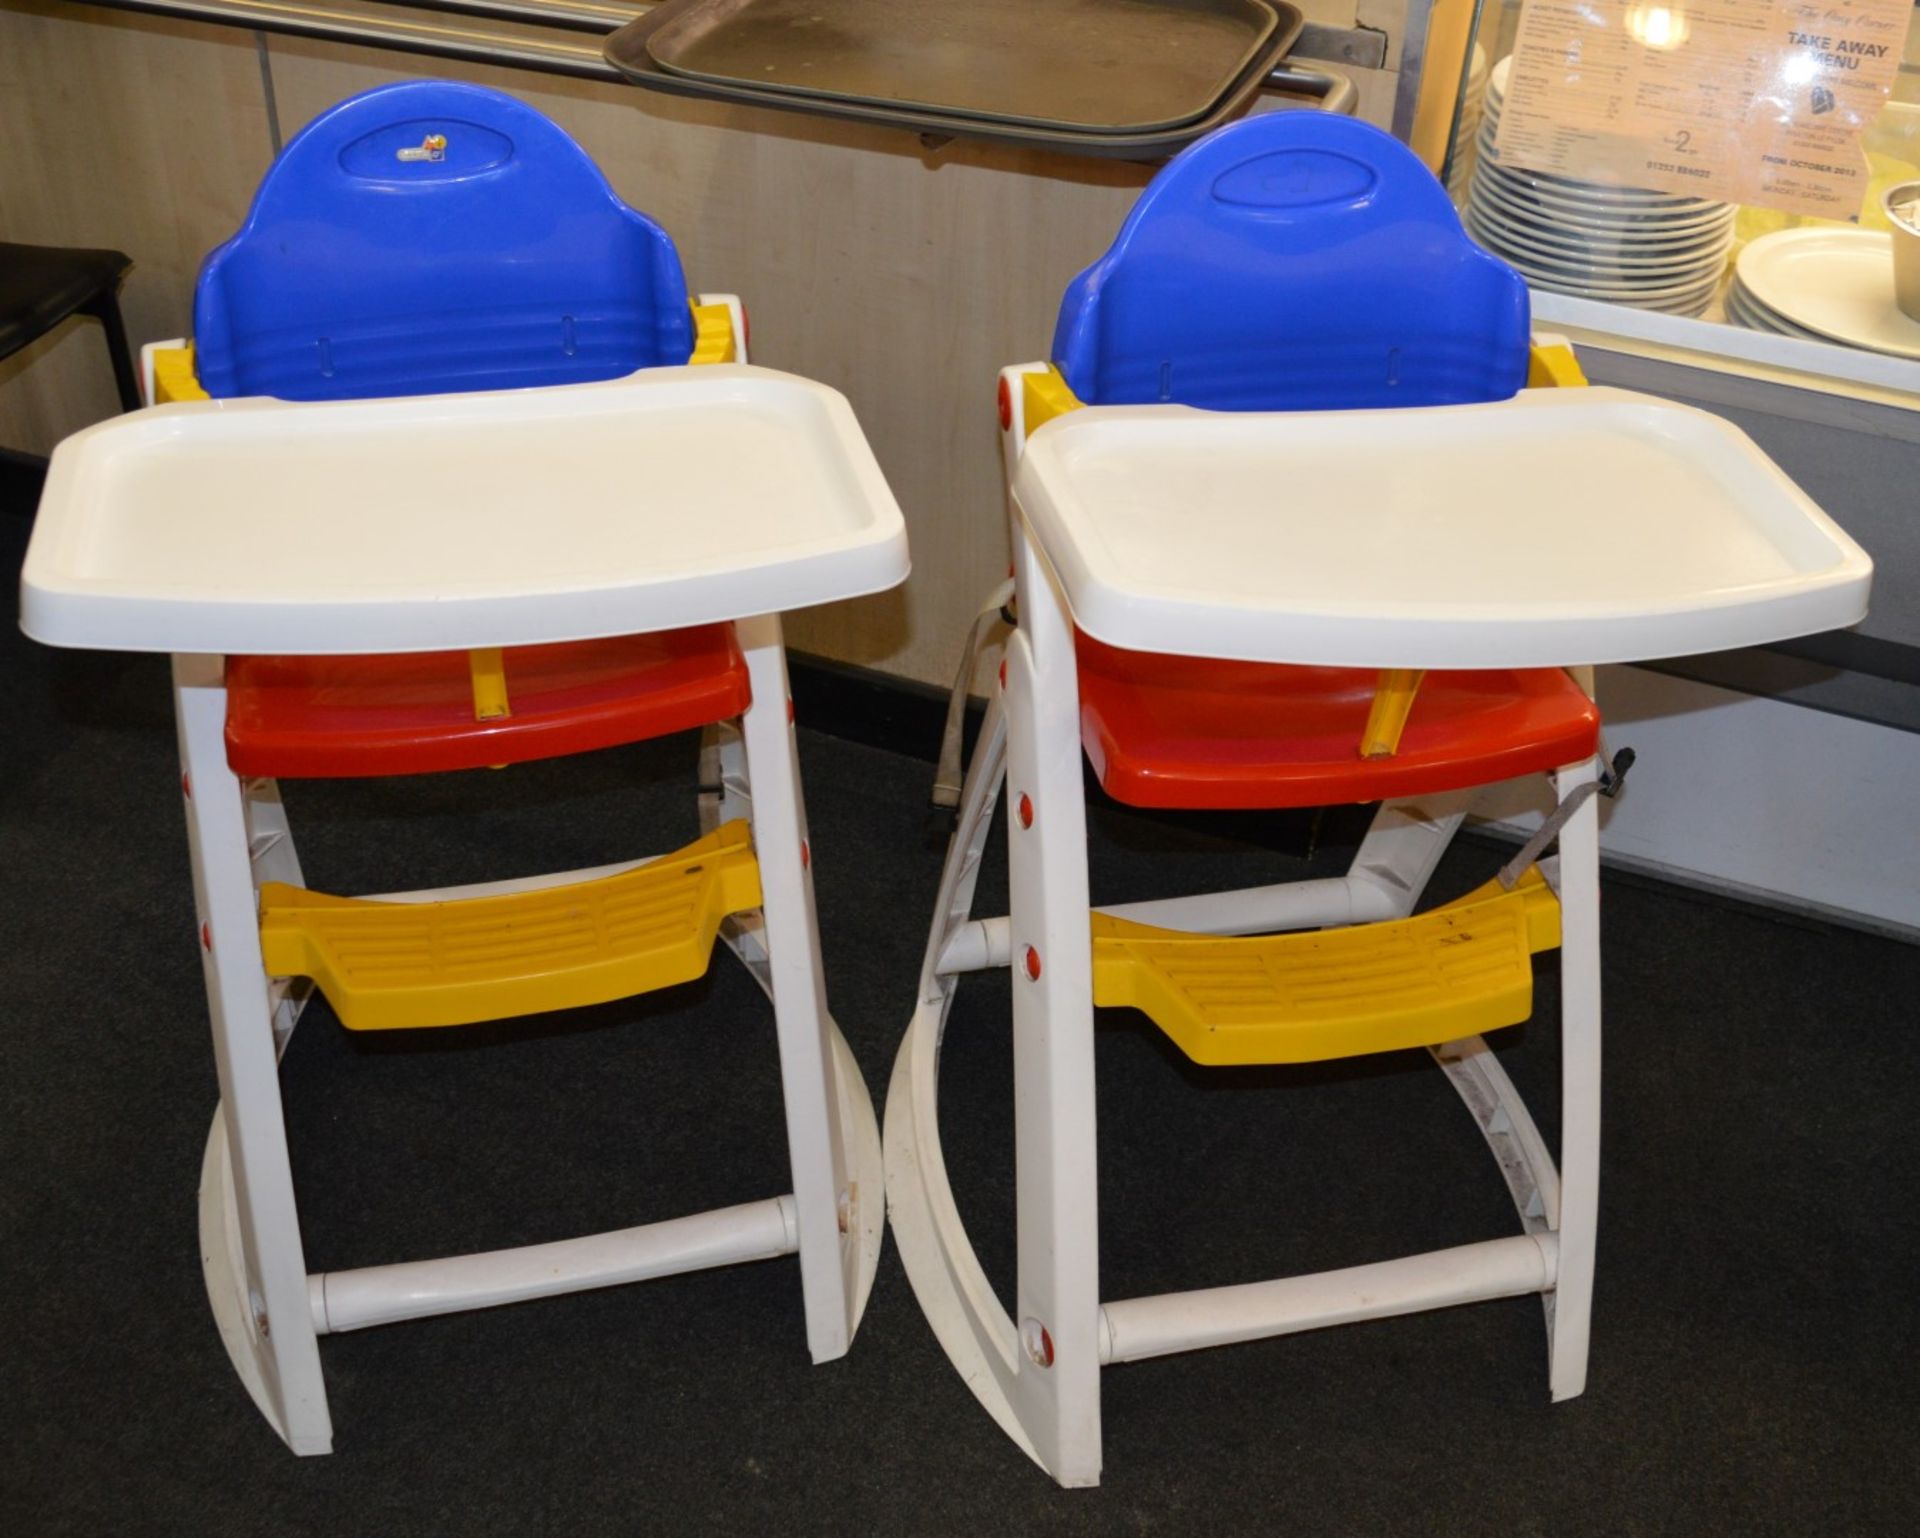 2 x Childrens High Chairs - K&D Design - Colourful Design - 3 Stage Highchair, Yourth Chair and